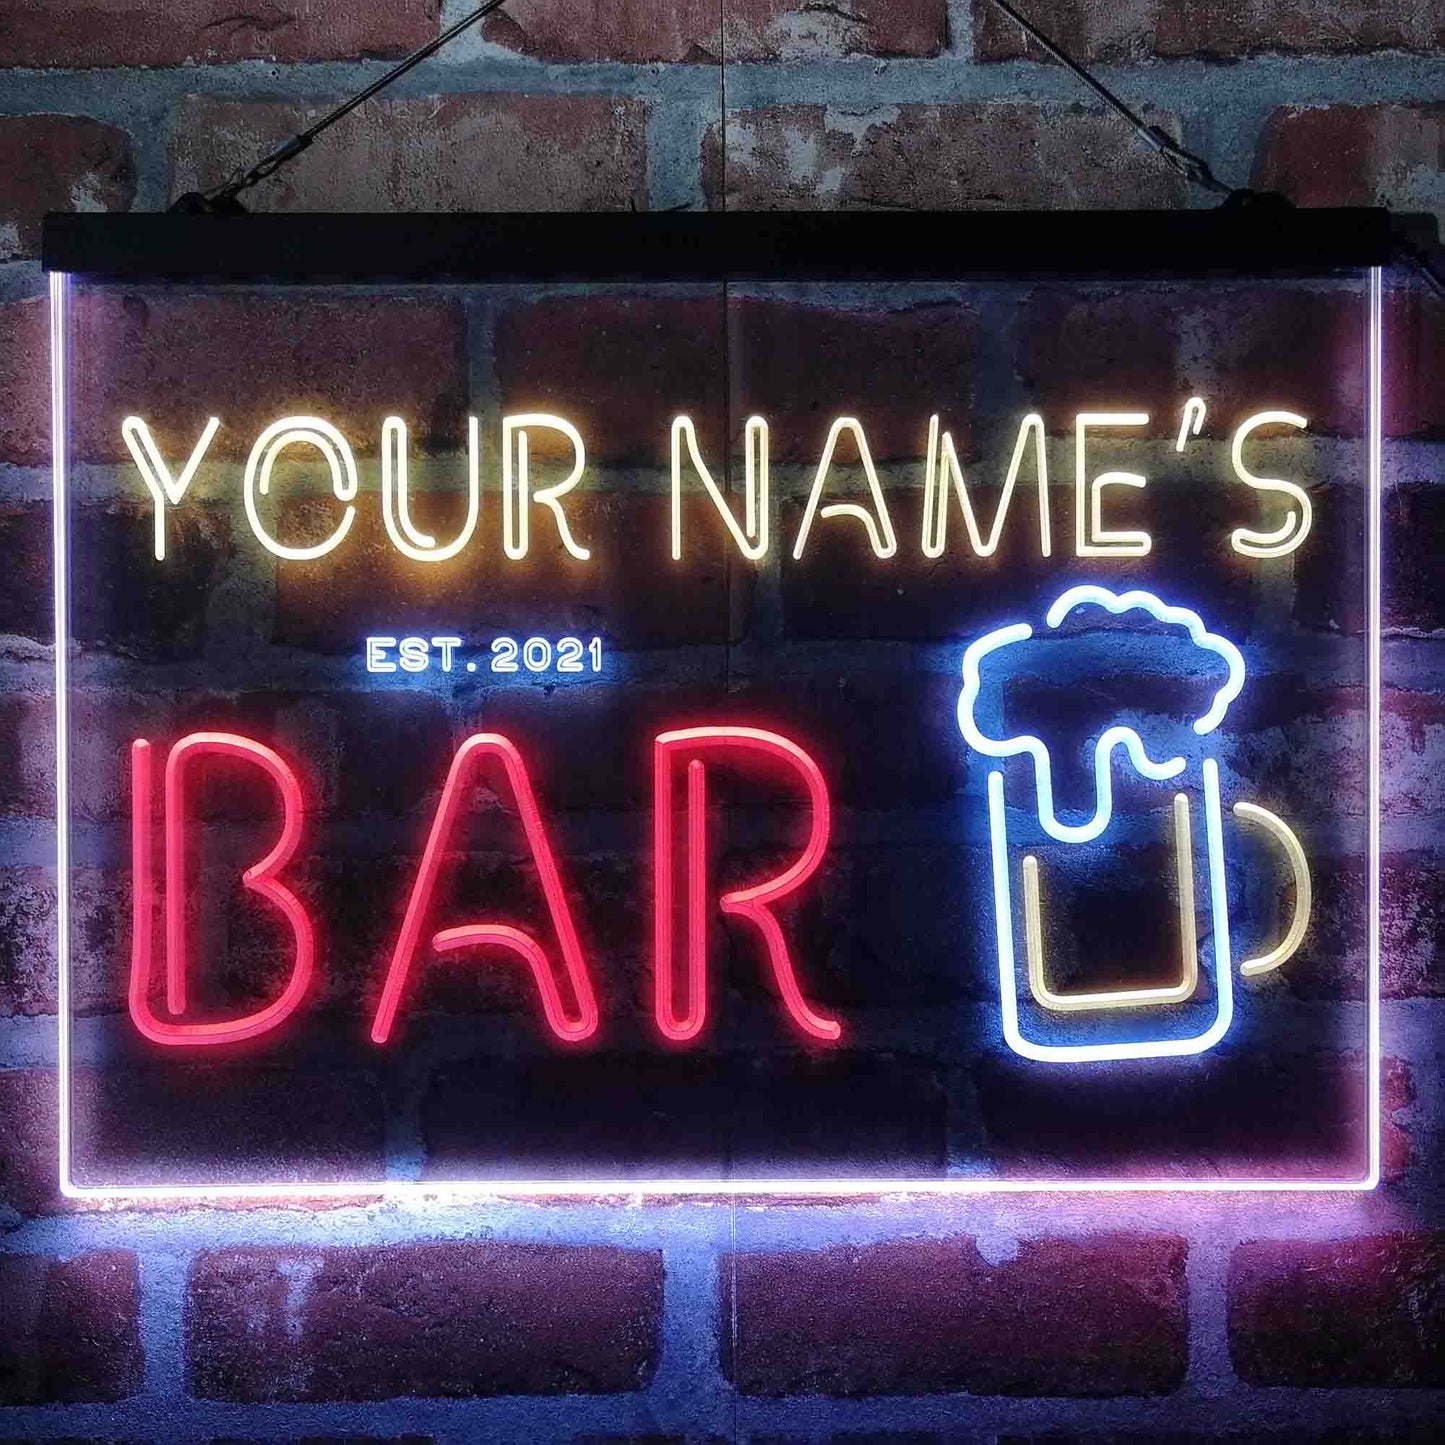 Personalized Pub Club Den Cabin 3-Color LED Neon Light Sign - Way Up Gifts